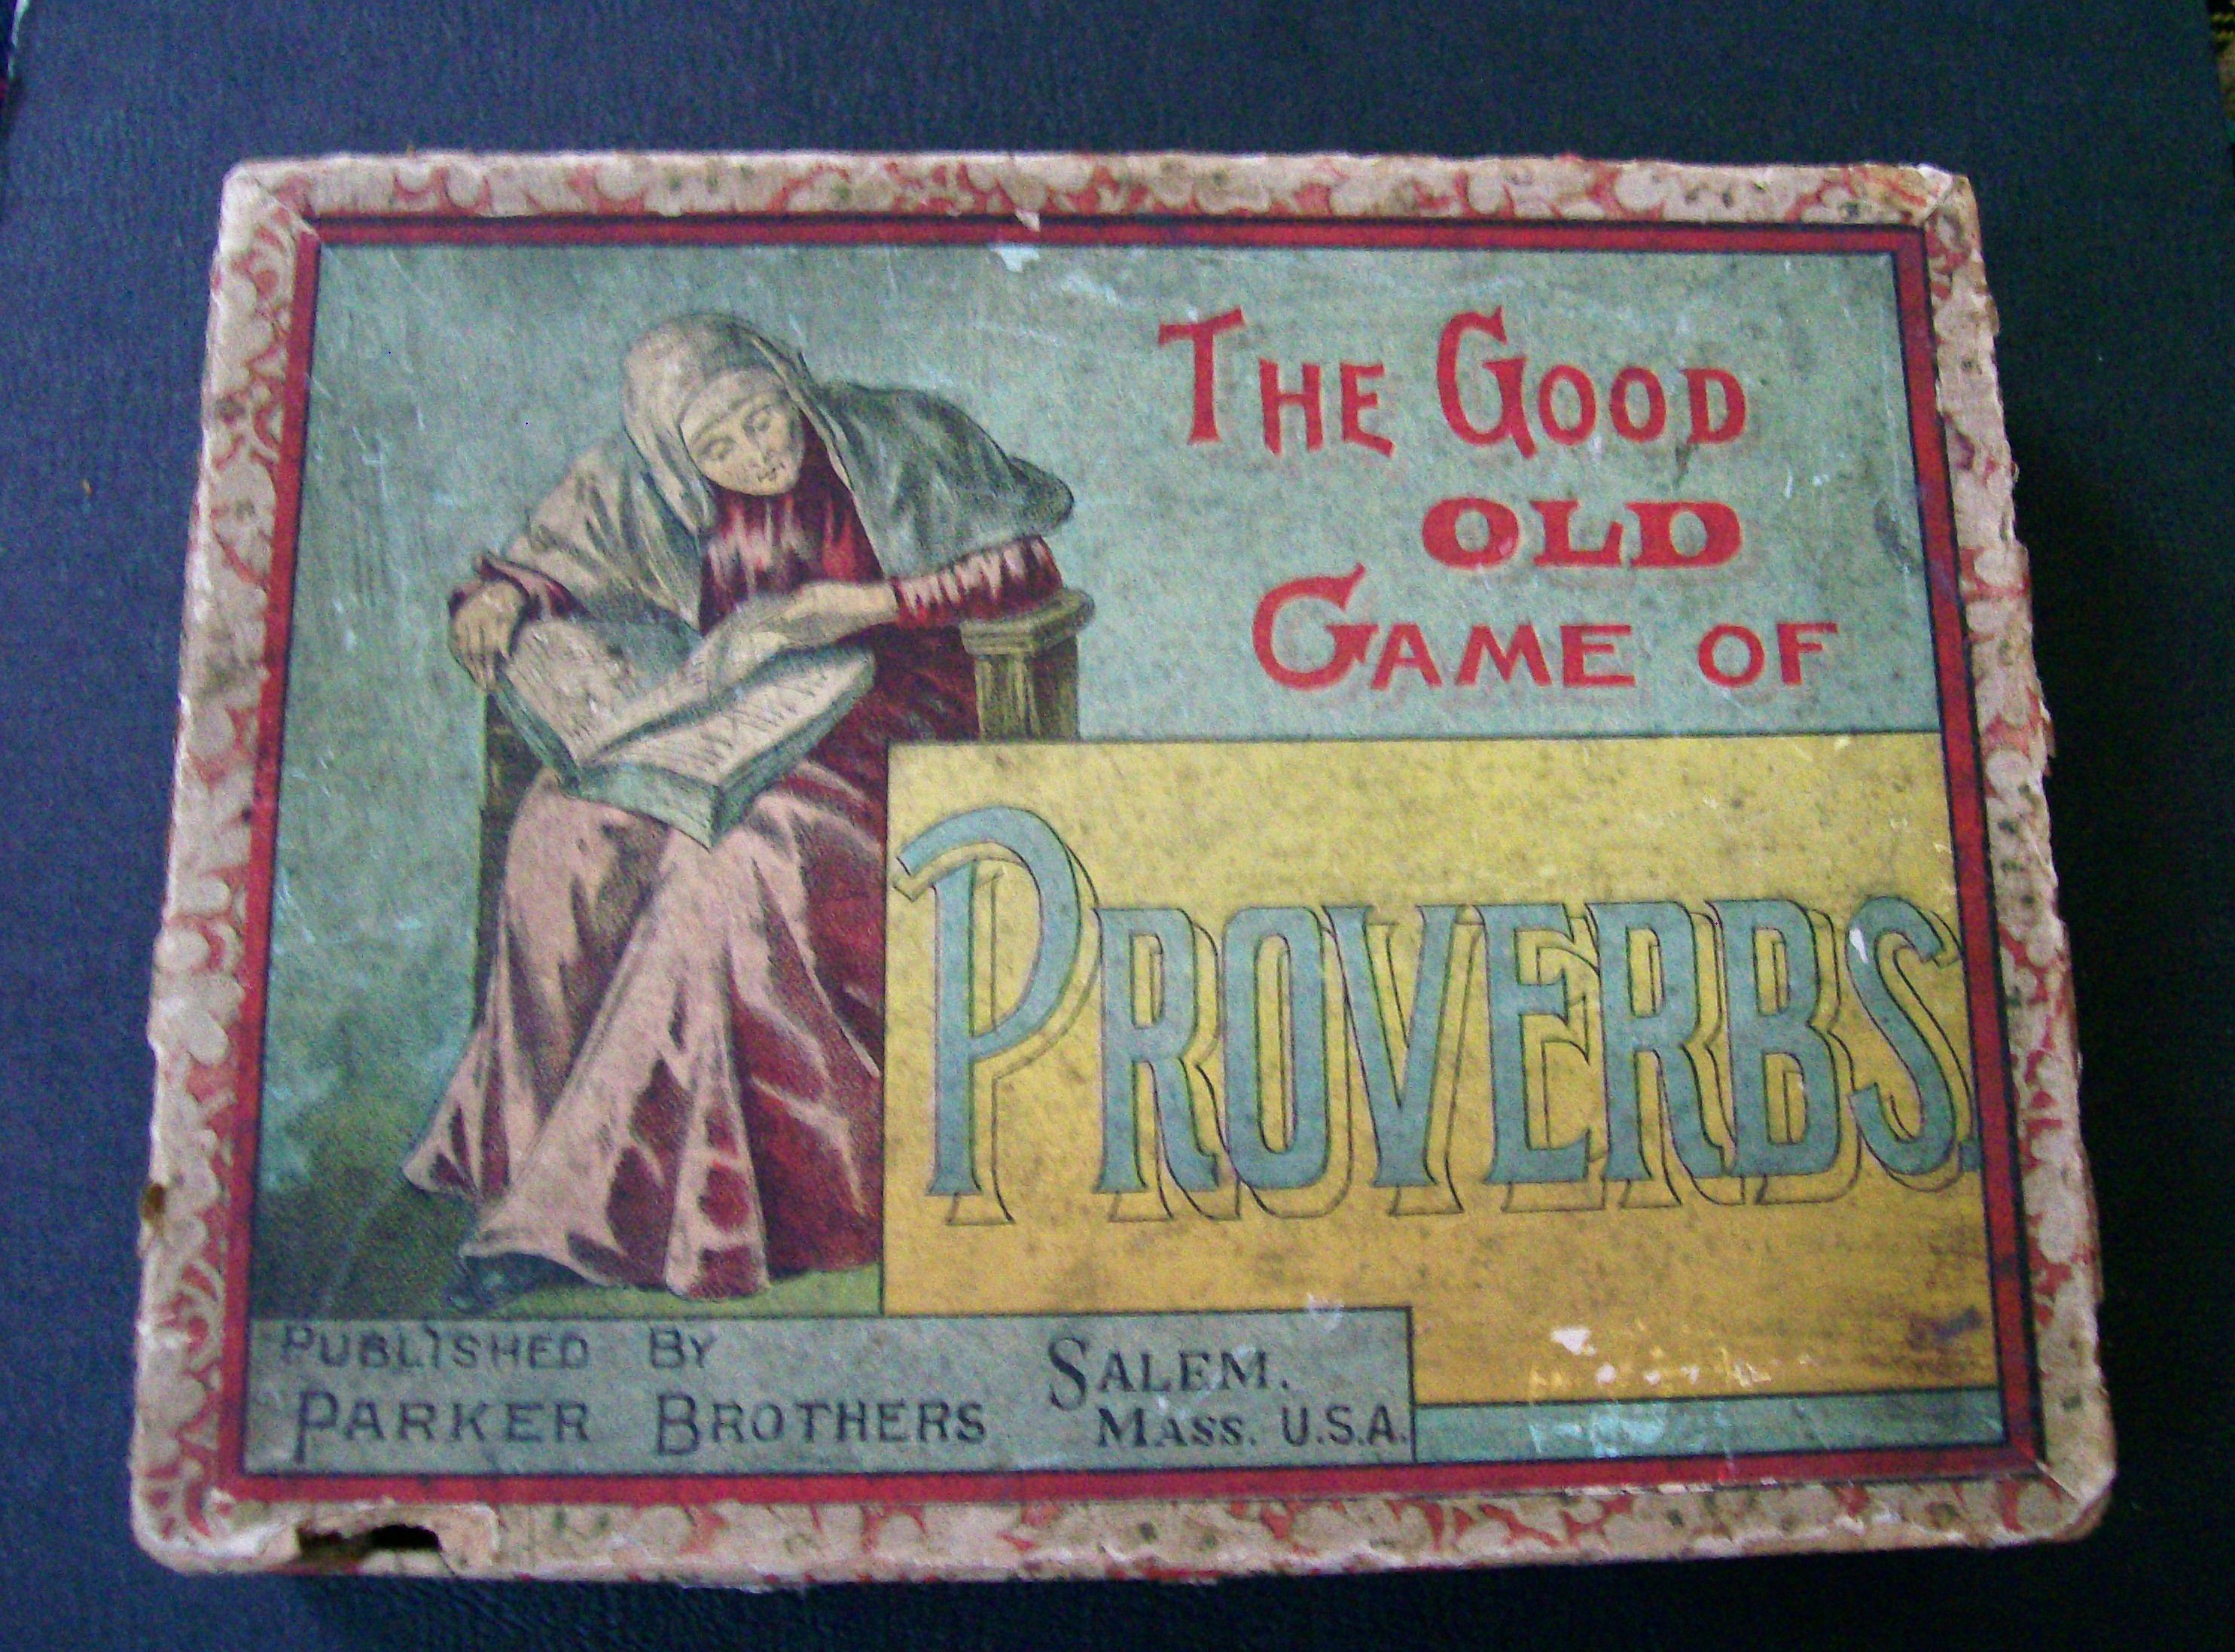 The Good Old Game of Proverbs by Parker Brothers